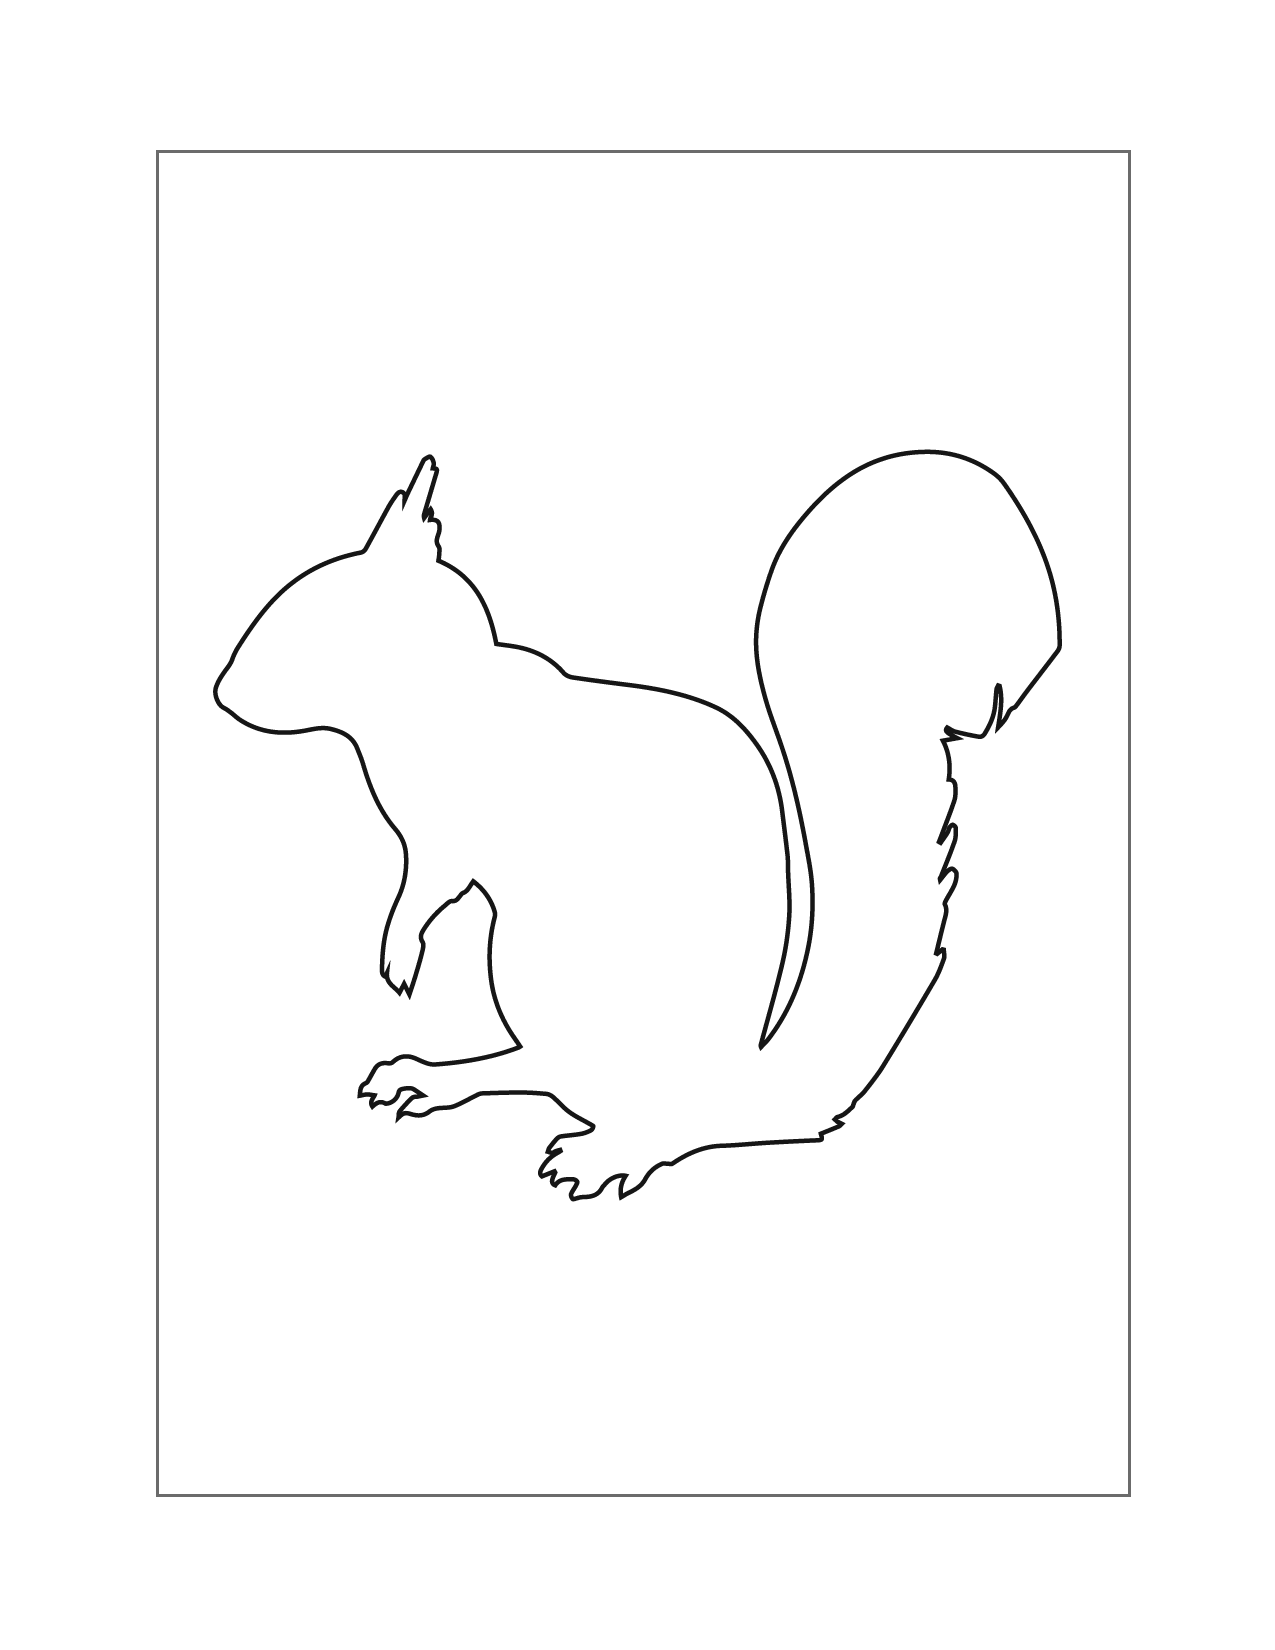 Squirrel Silouette Coloring Page